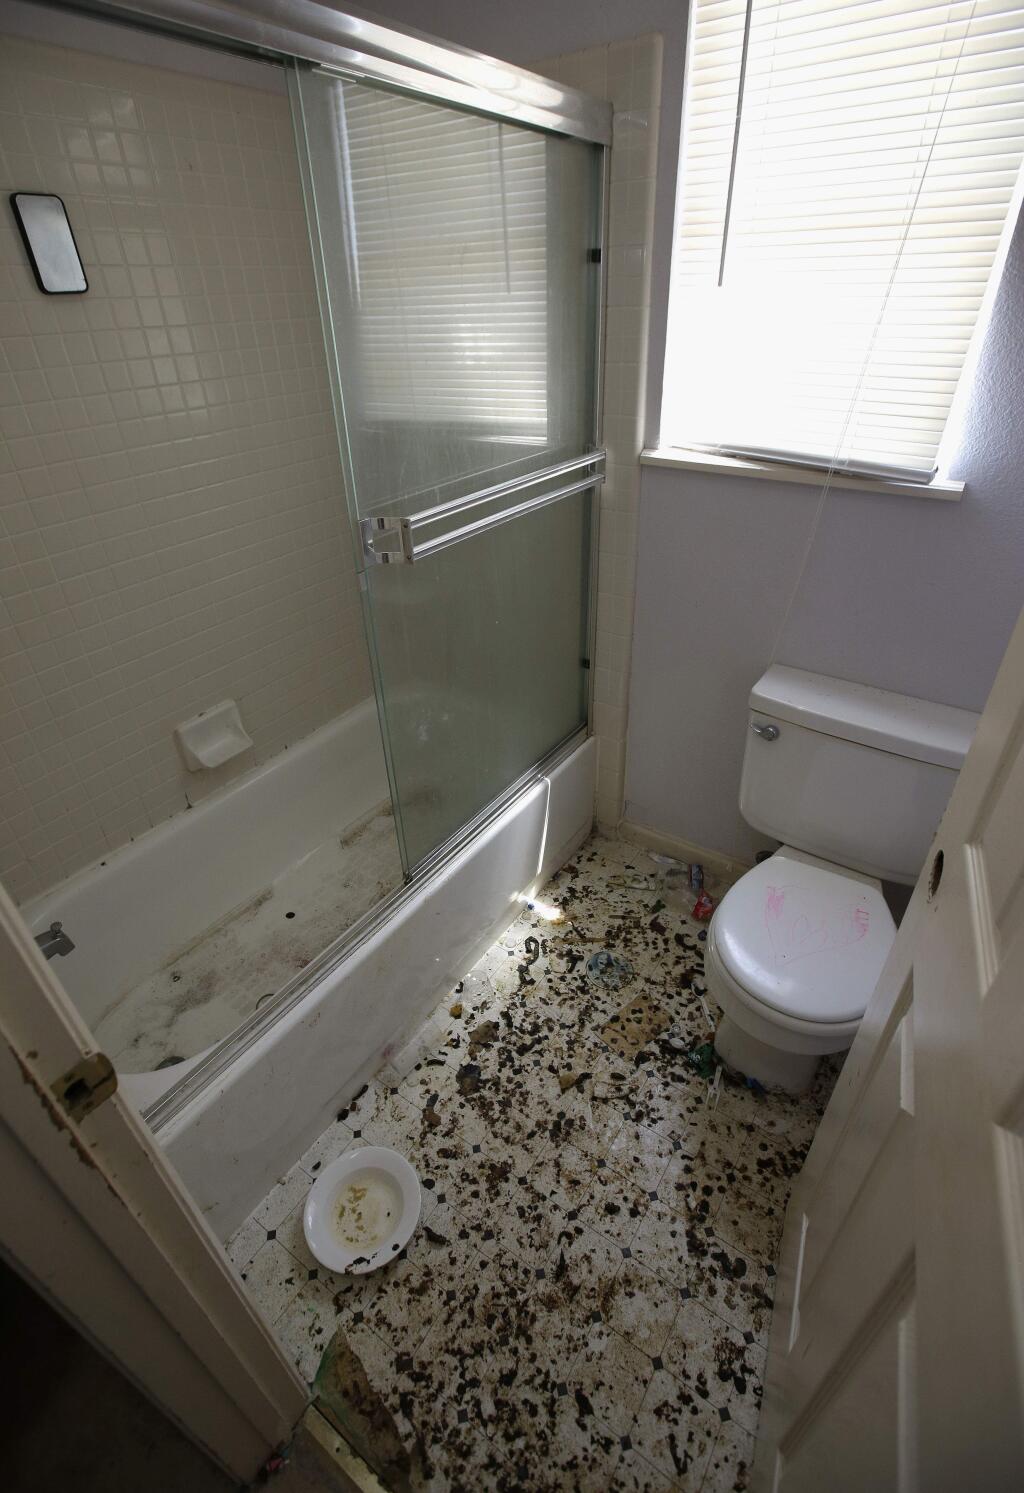 The bathroom is strewn with feces at a home in Fairfield, Calif., Monday, May 14, 2018, where authorities removed 10 children and charged their father with torture and their mother with neglect after an investigation revealed a lengthy period of severe physical and emotional abuse. (AP Photo/Rich Pedroncelli)